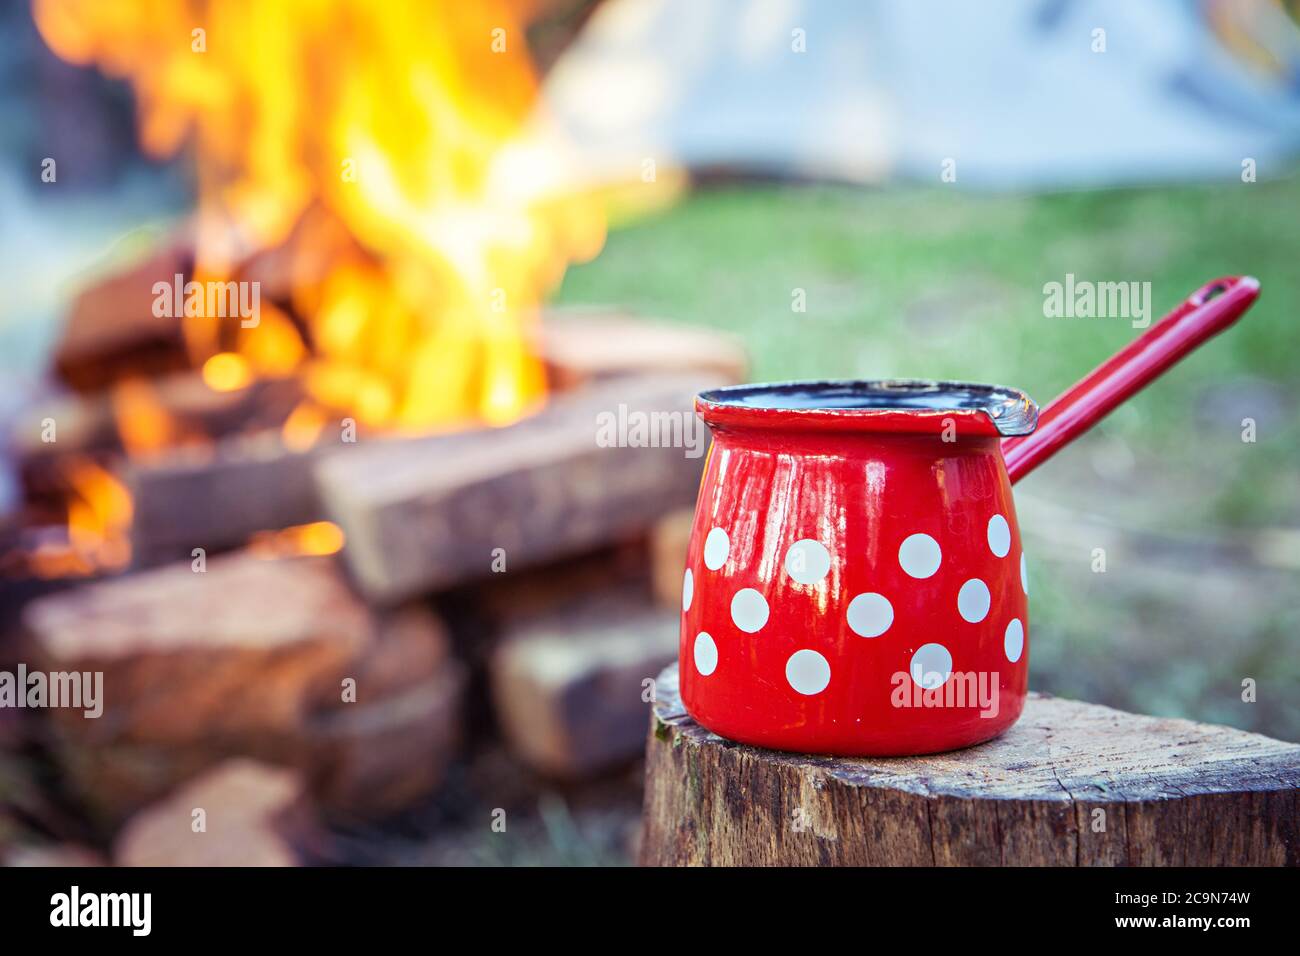 https://c8.alamy.com/comp/2C9N74W/close-up-of-red-coffee-pot-on-top-of-wood-stump-with-campfire-and-camping-tent-in-the-background-2C9N74W.jpg